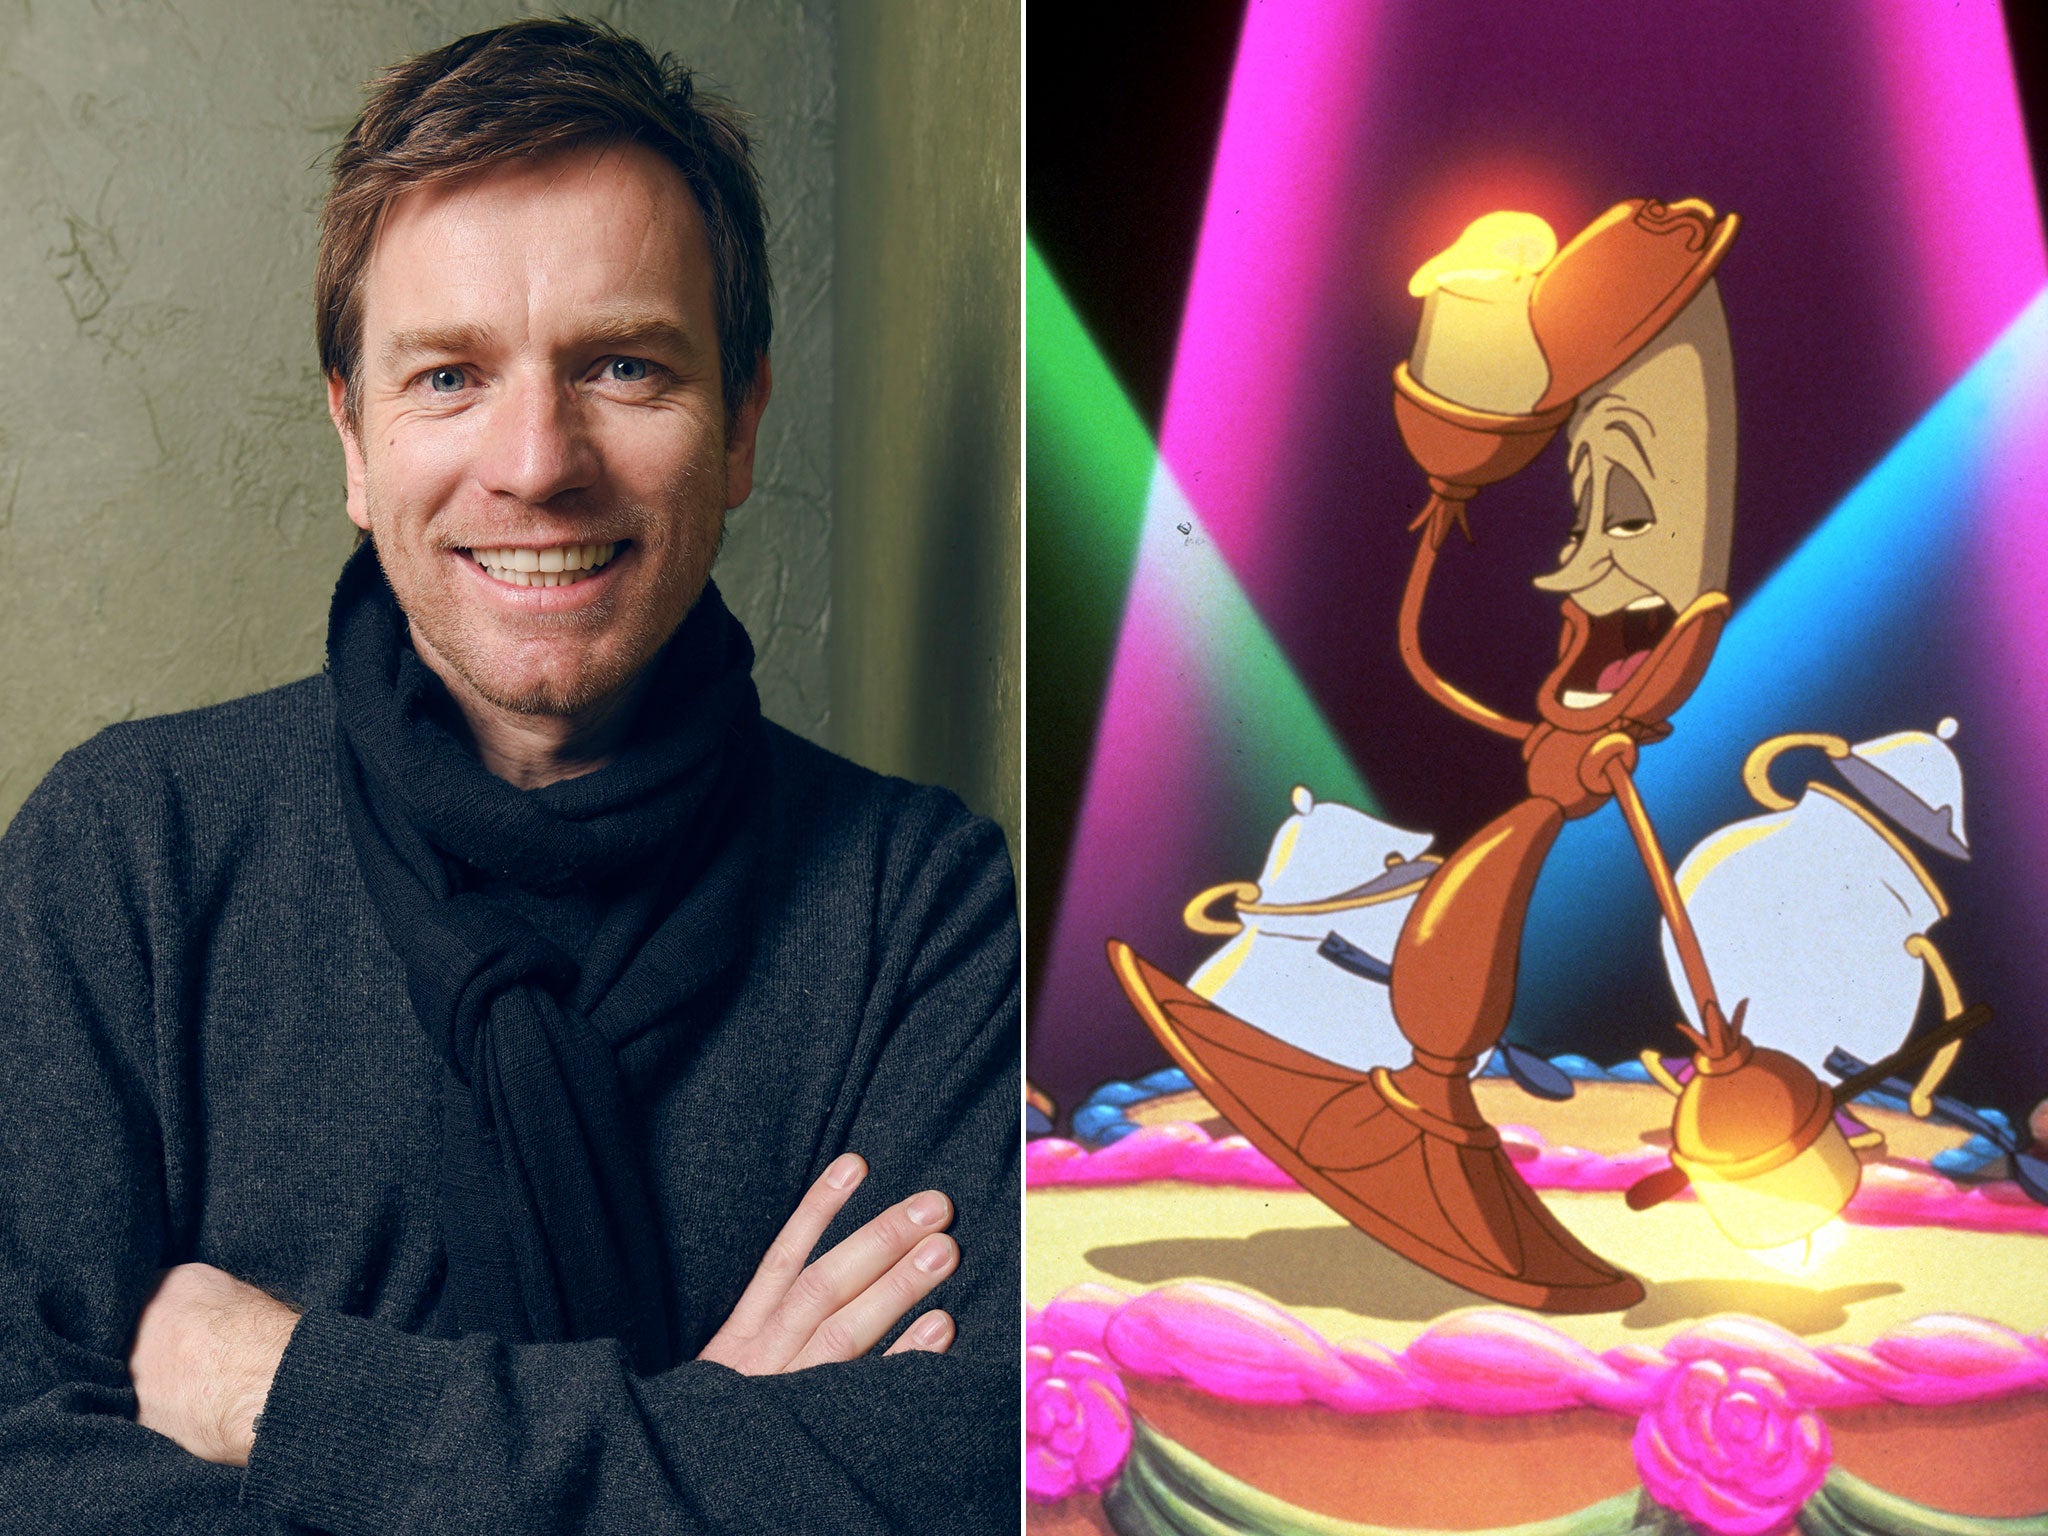 Ewan McGregor looks set to play Lumiere in the Beauty and the Beast live action remake